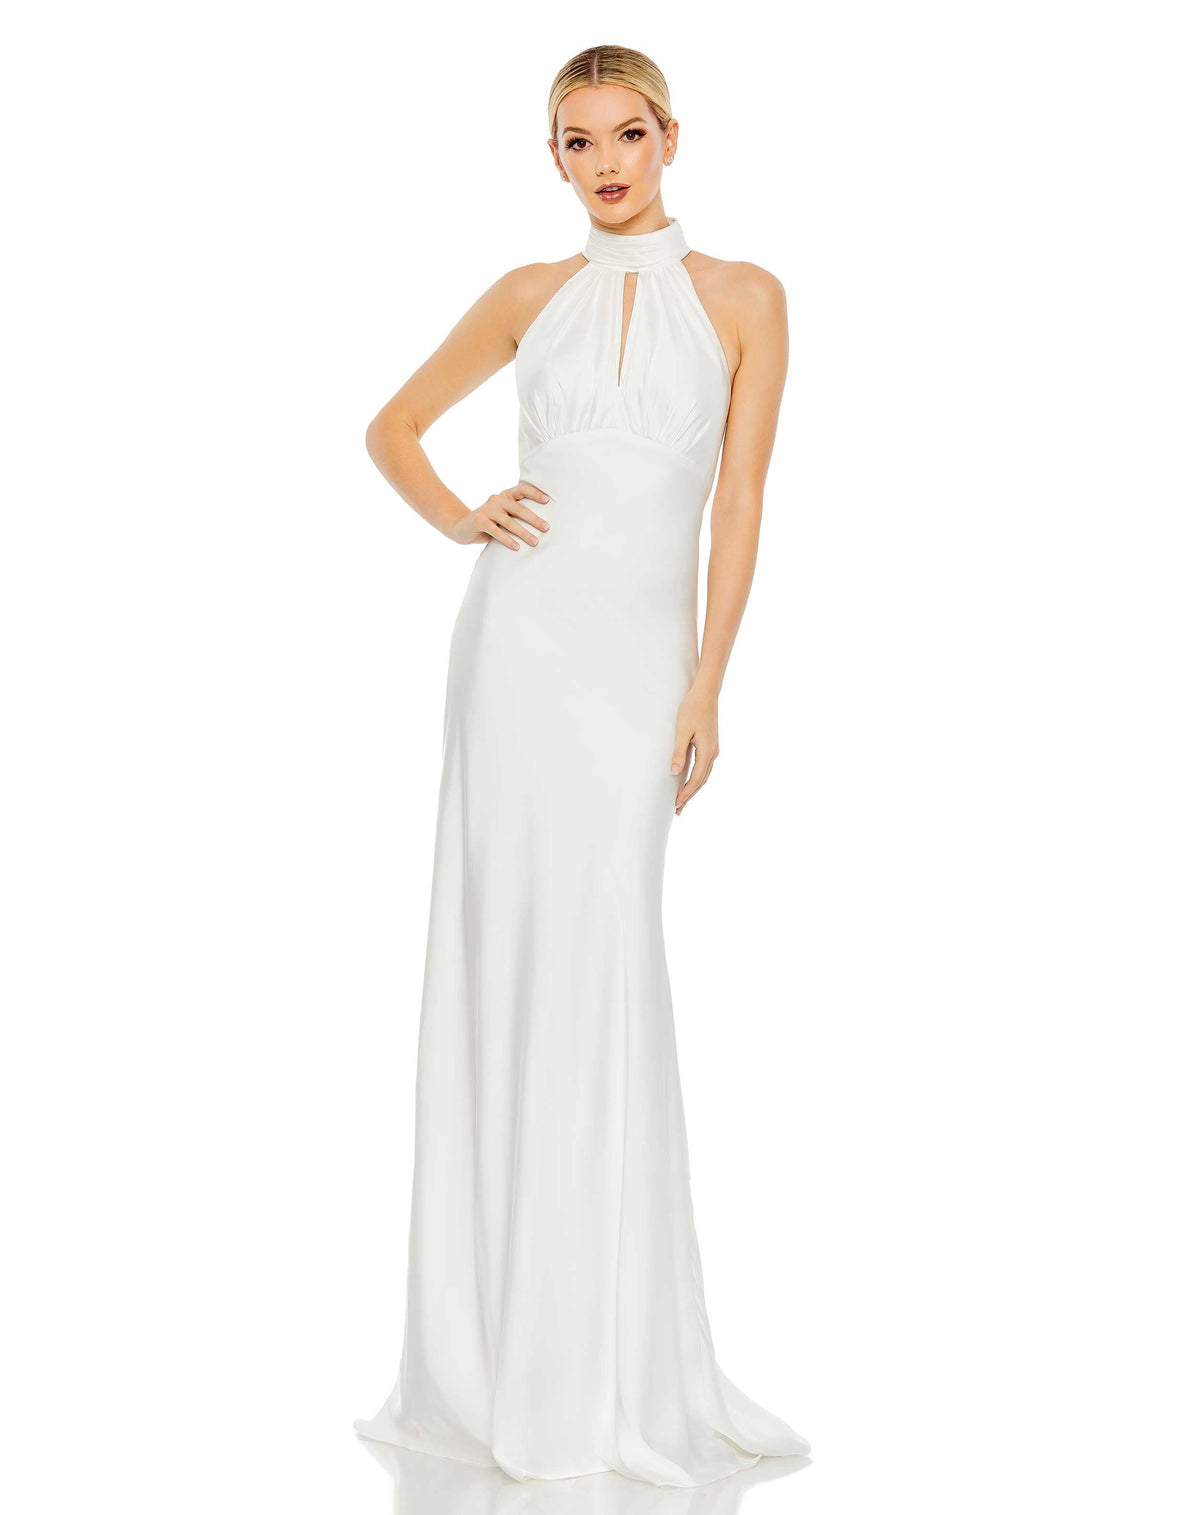 mac duggal Keyhole Halter Empire Waist Gown - White, engagement party dress, Style # 49520